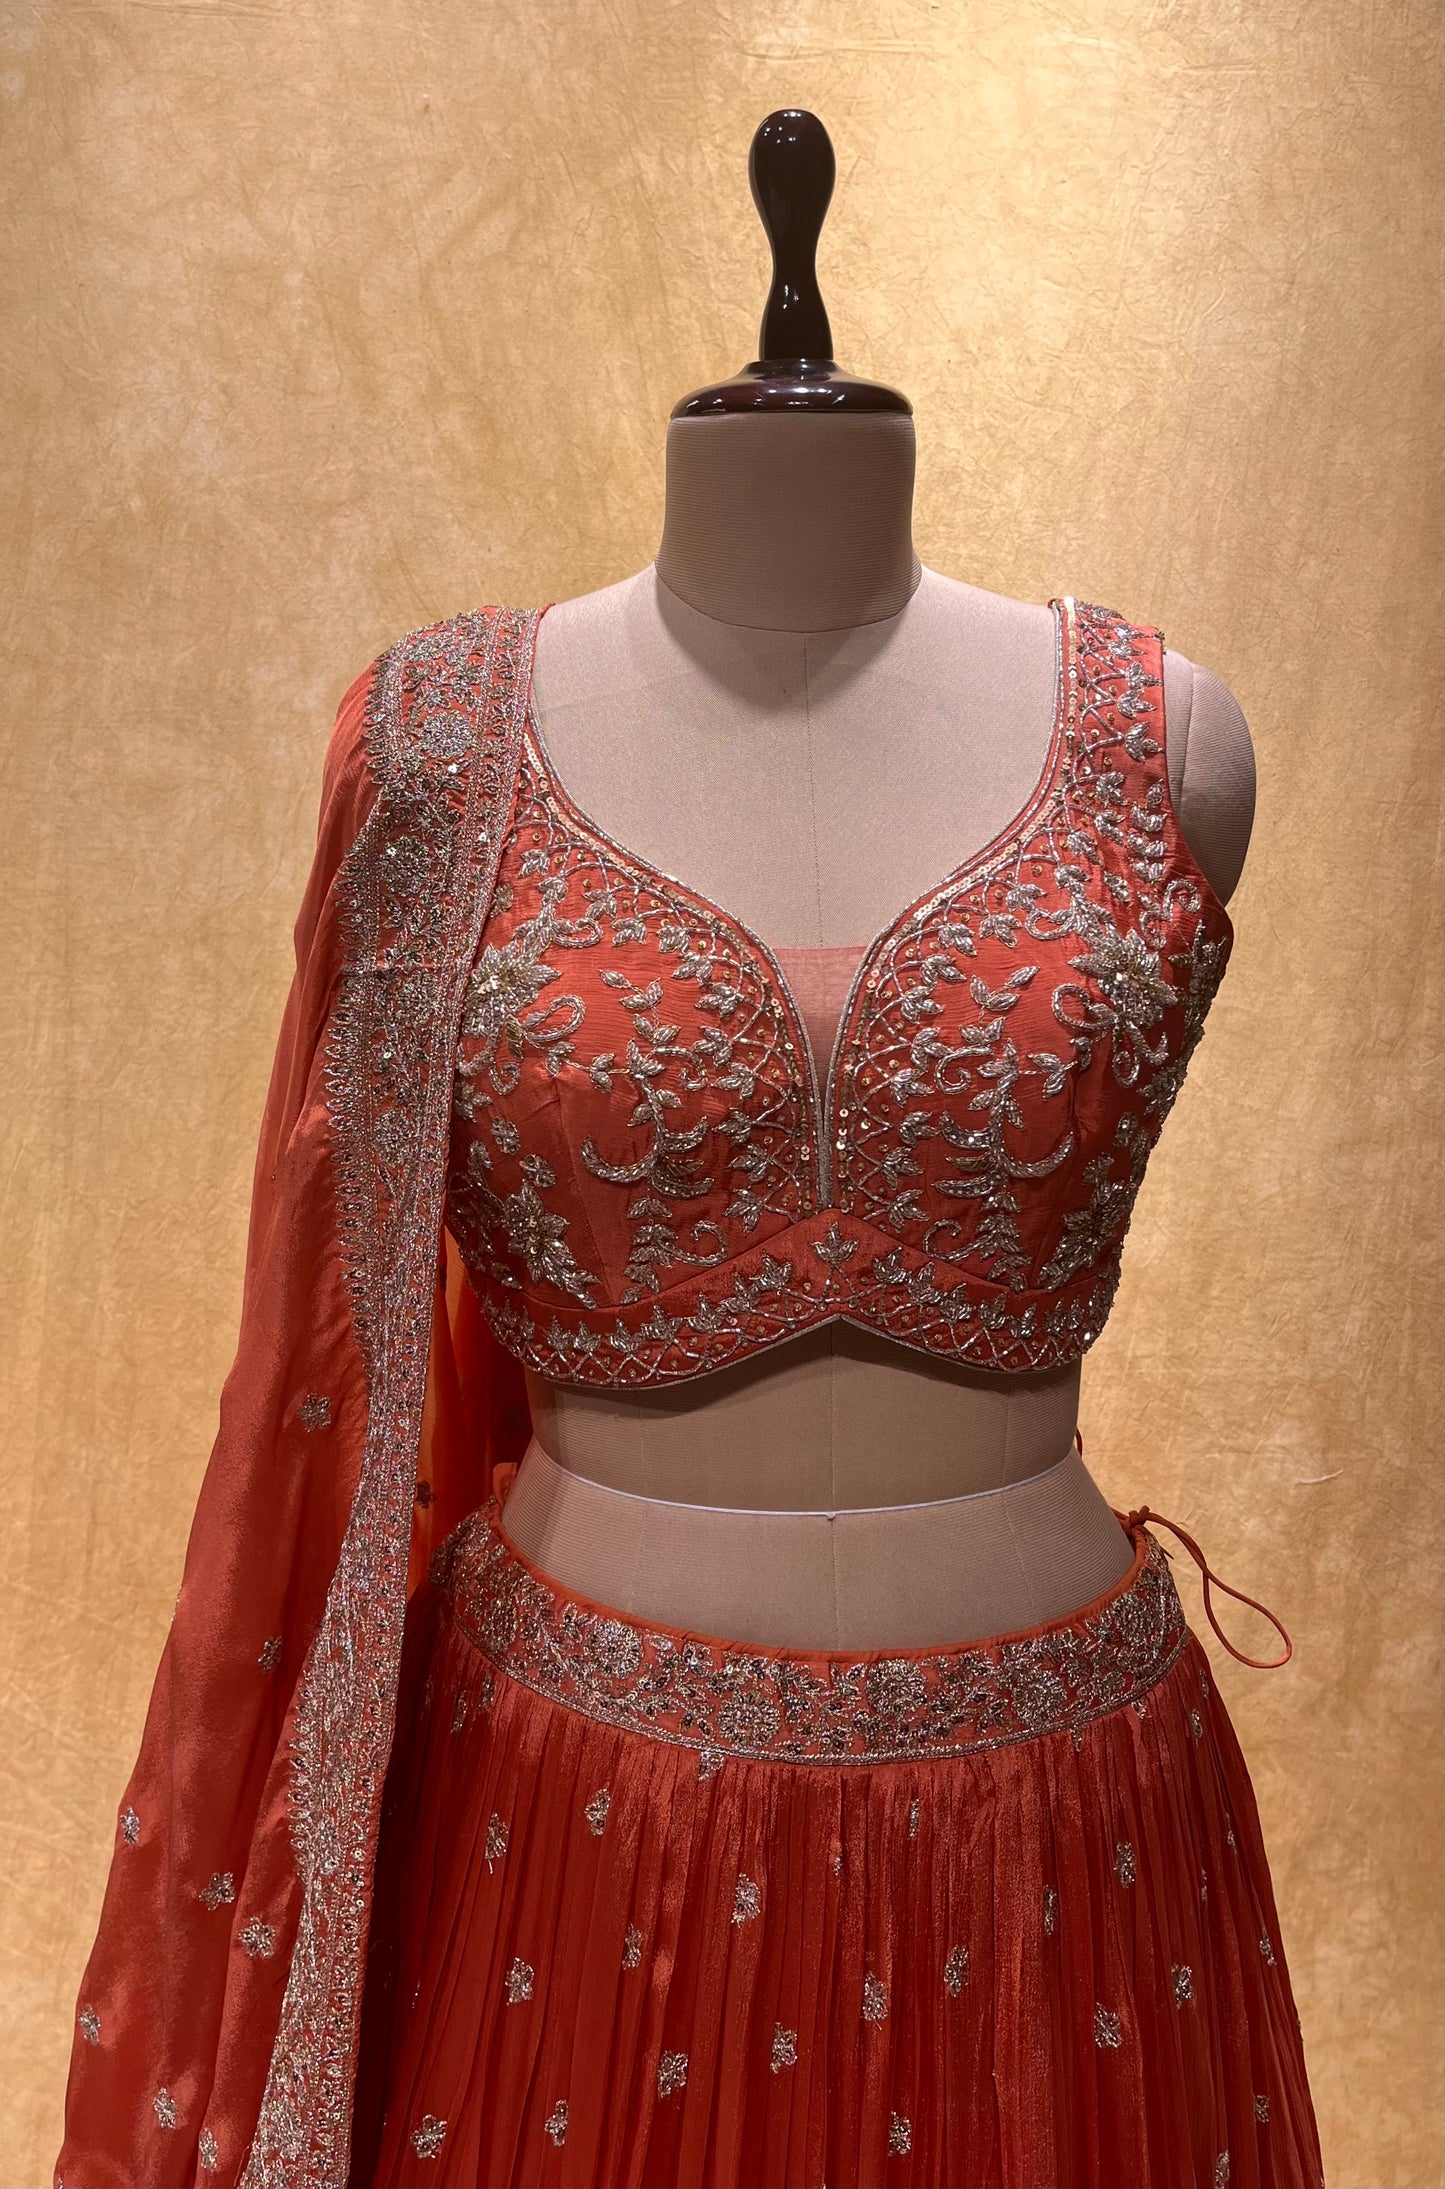 (DELIVERY IN 20-25 DAYS) BRIDESMAIDS READYMADE RUST ORANGE COLOUR CHINON LEHENGA WITH CROP TOP BLOUSE EMBELLISHED WITH ZARI & CUTDANA WORK